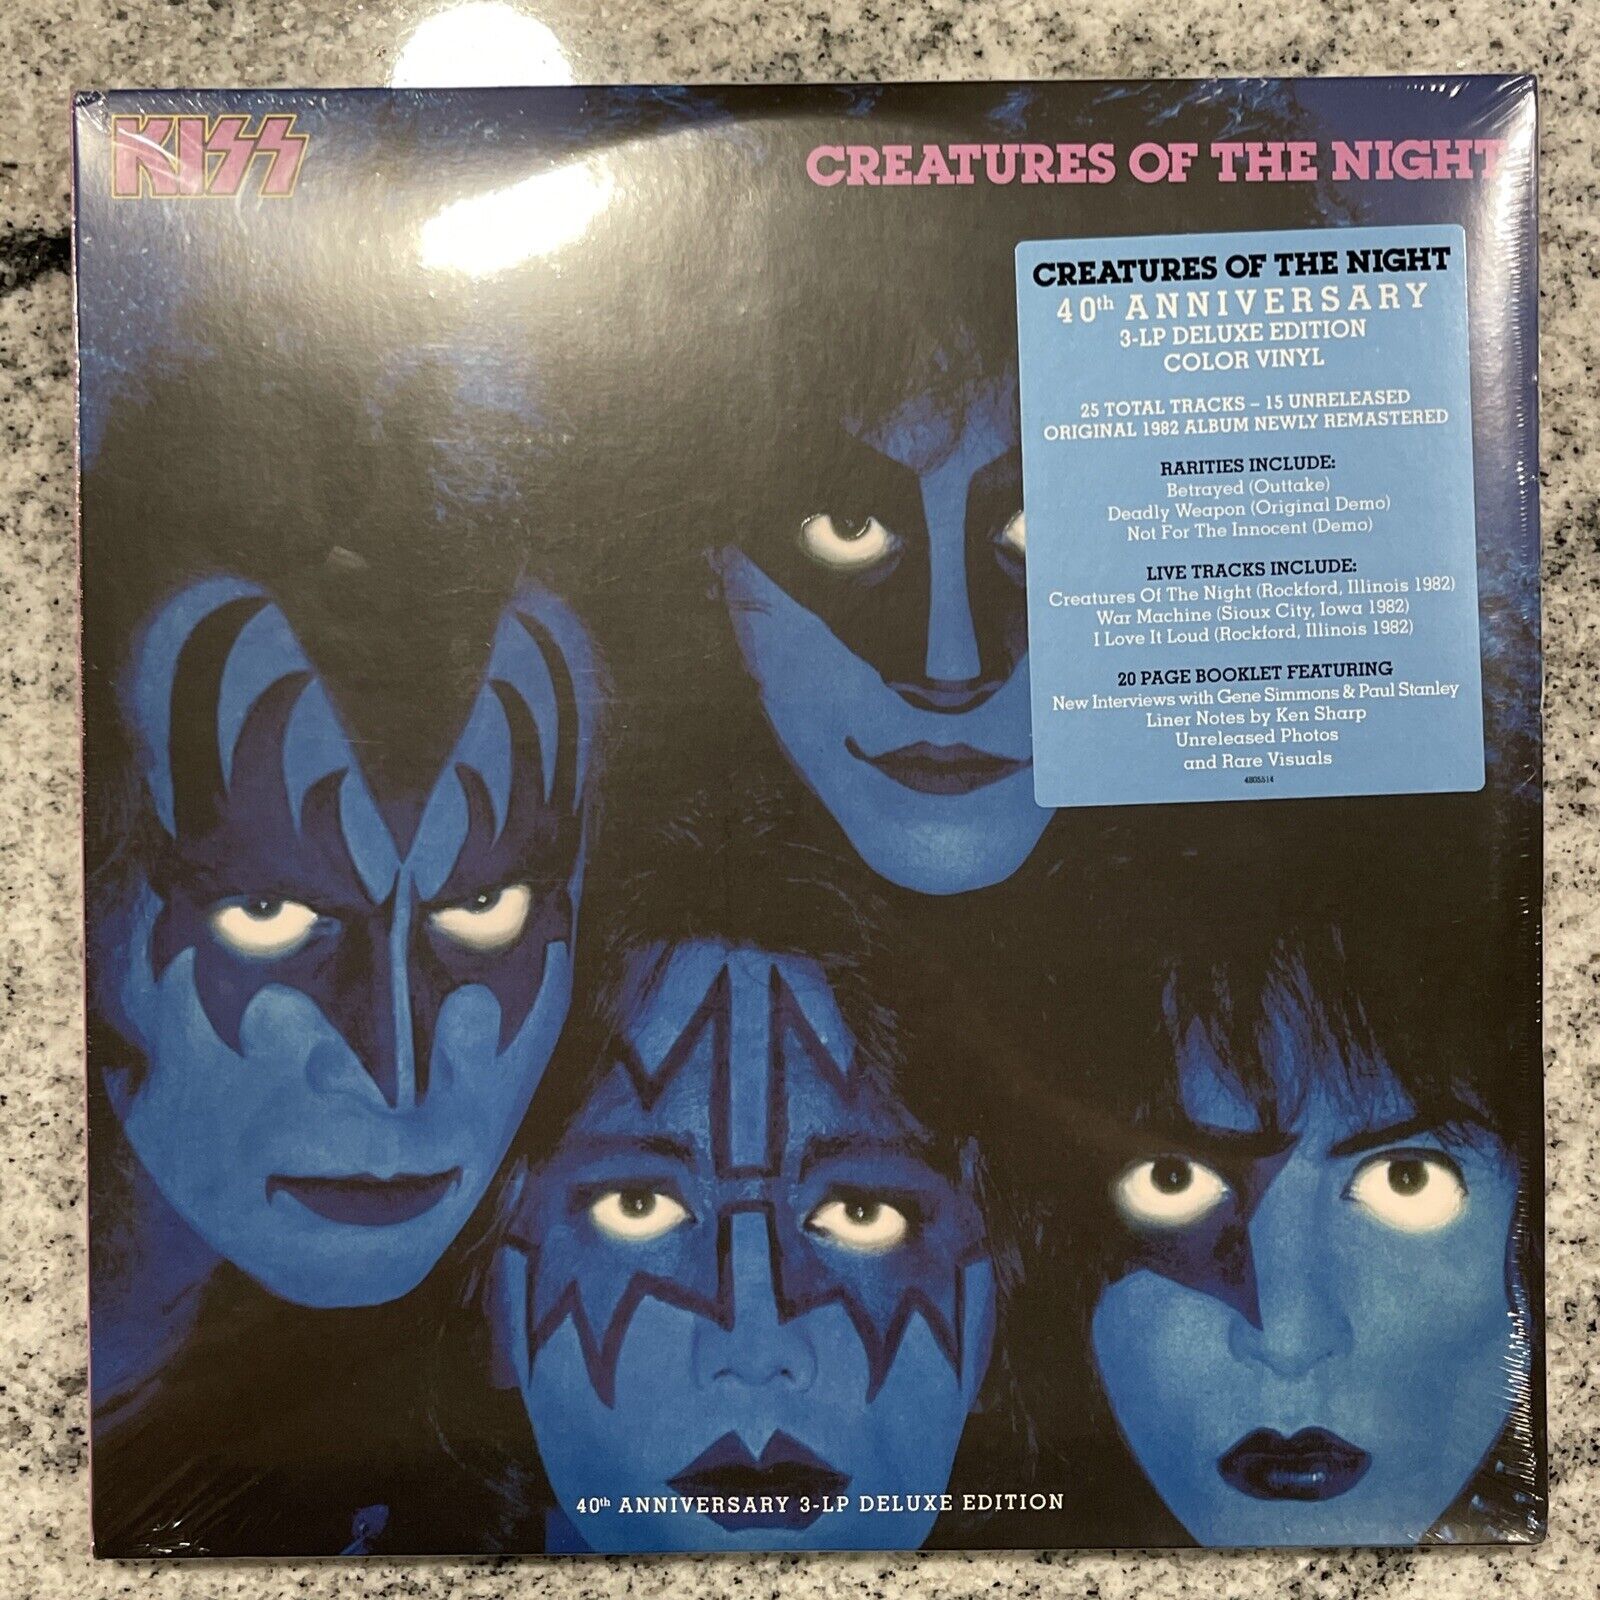 KISS 40th Anniversary CREATURES OF THE NIGHT Deluxe Edition 3LP Blue Vinyl NEW